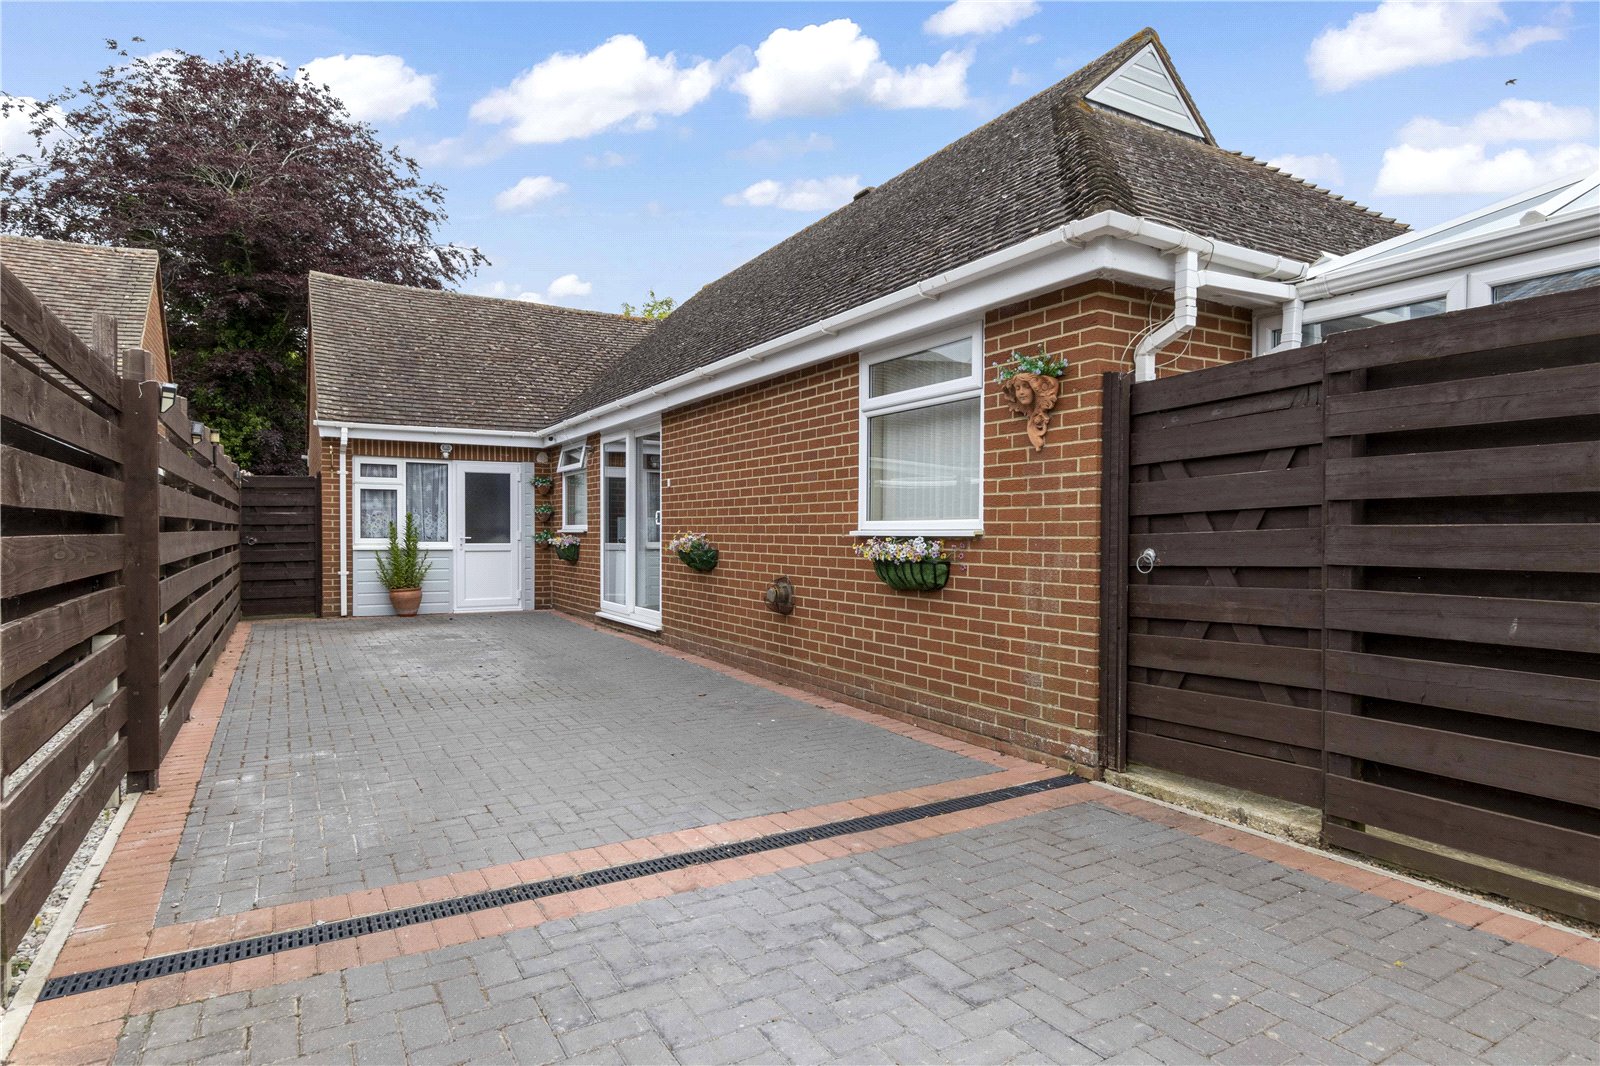 3 bed bungalow for sale in Chawkmare Coppice, Bognor Regis  - Property Image 16